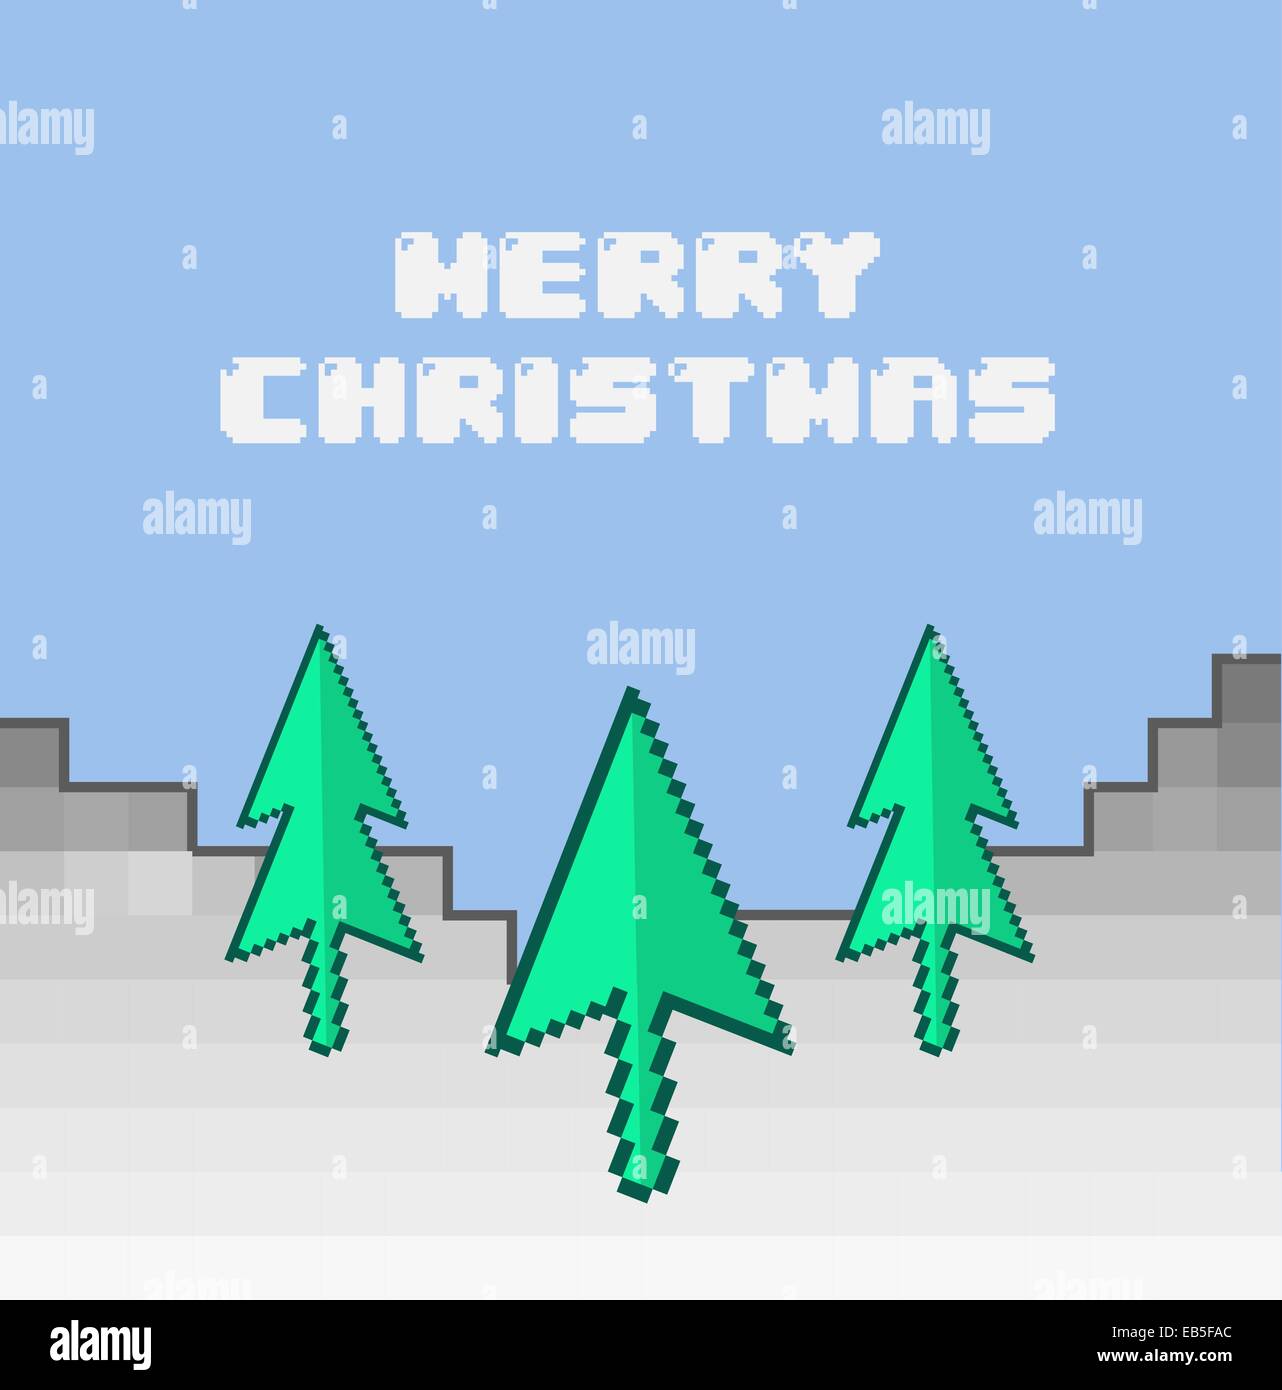 Merry christmas vector in retro video game style Stock Vector